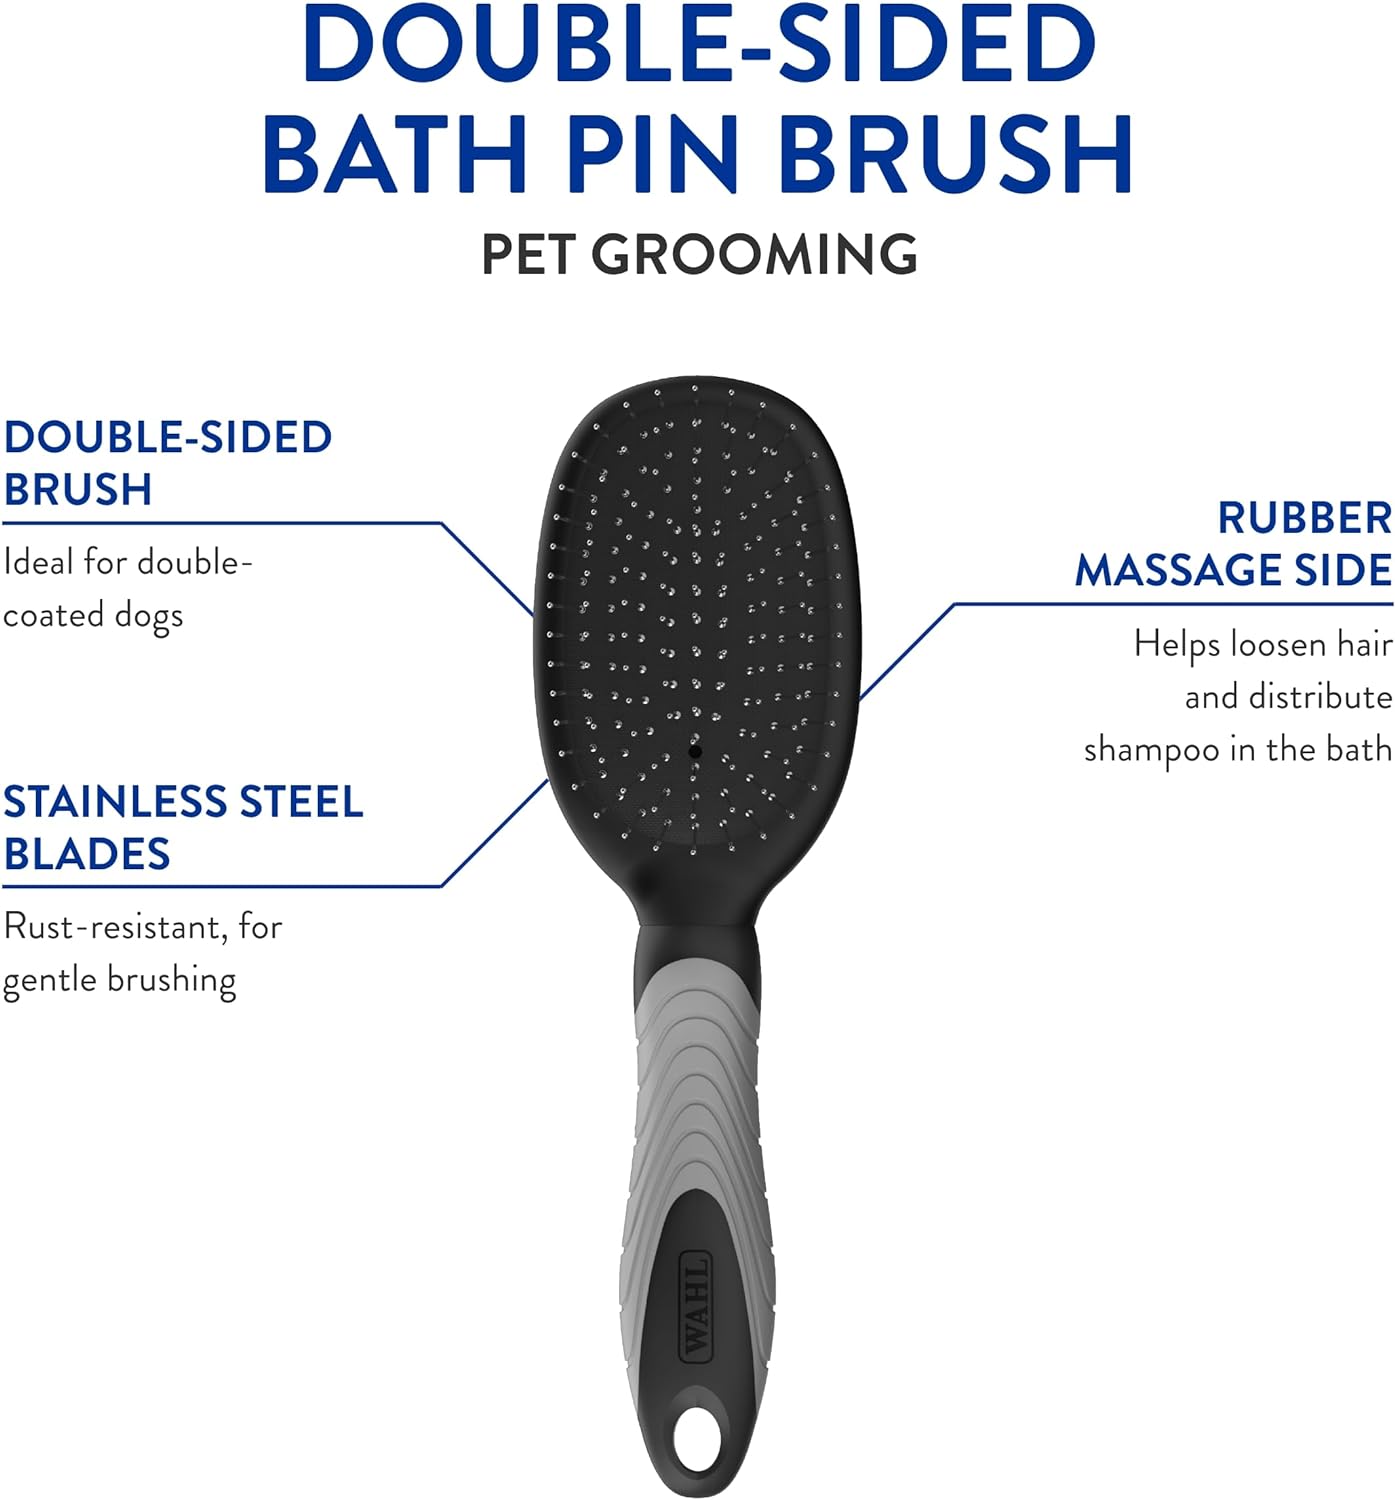 WAHL Professional Animal Double Sided Bath Pin Brush for Dogs, 96 Pack